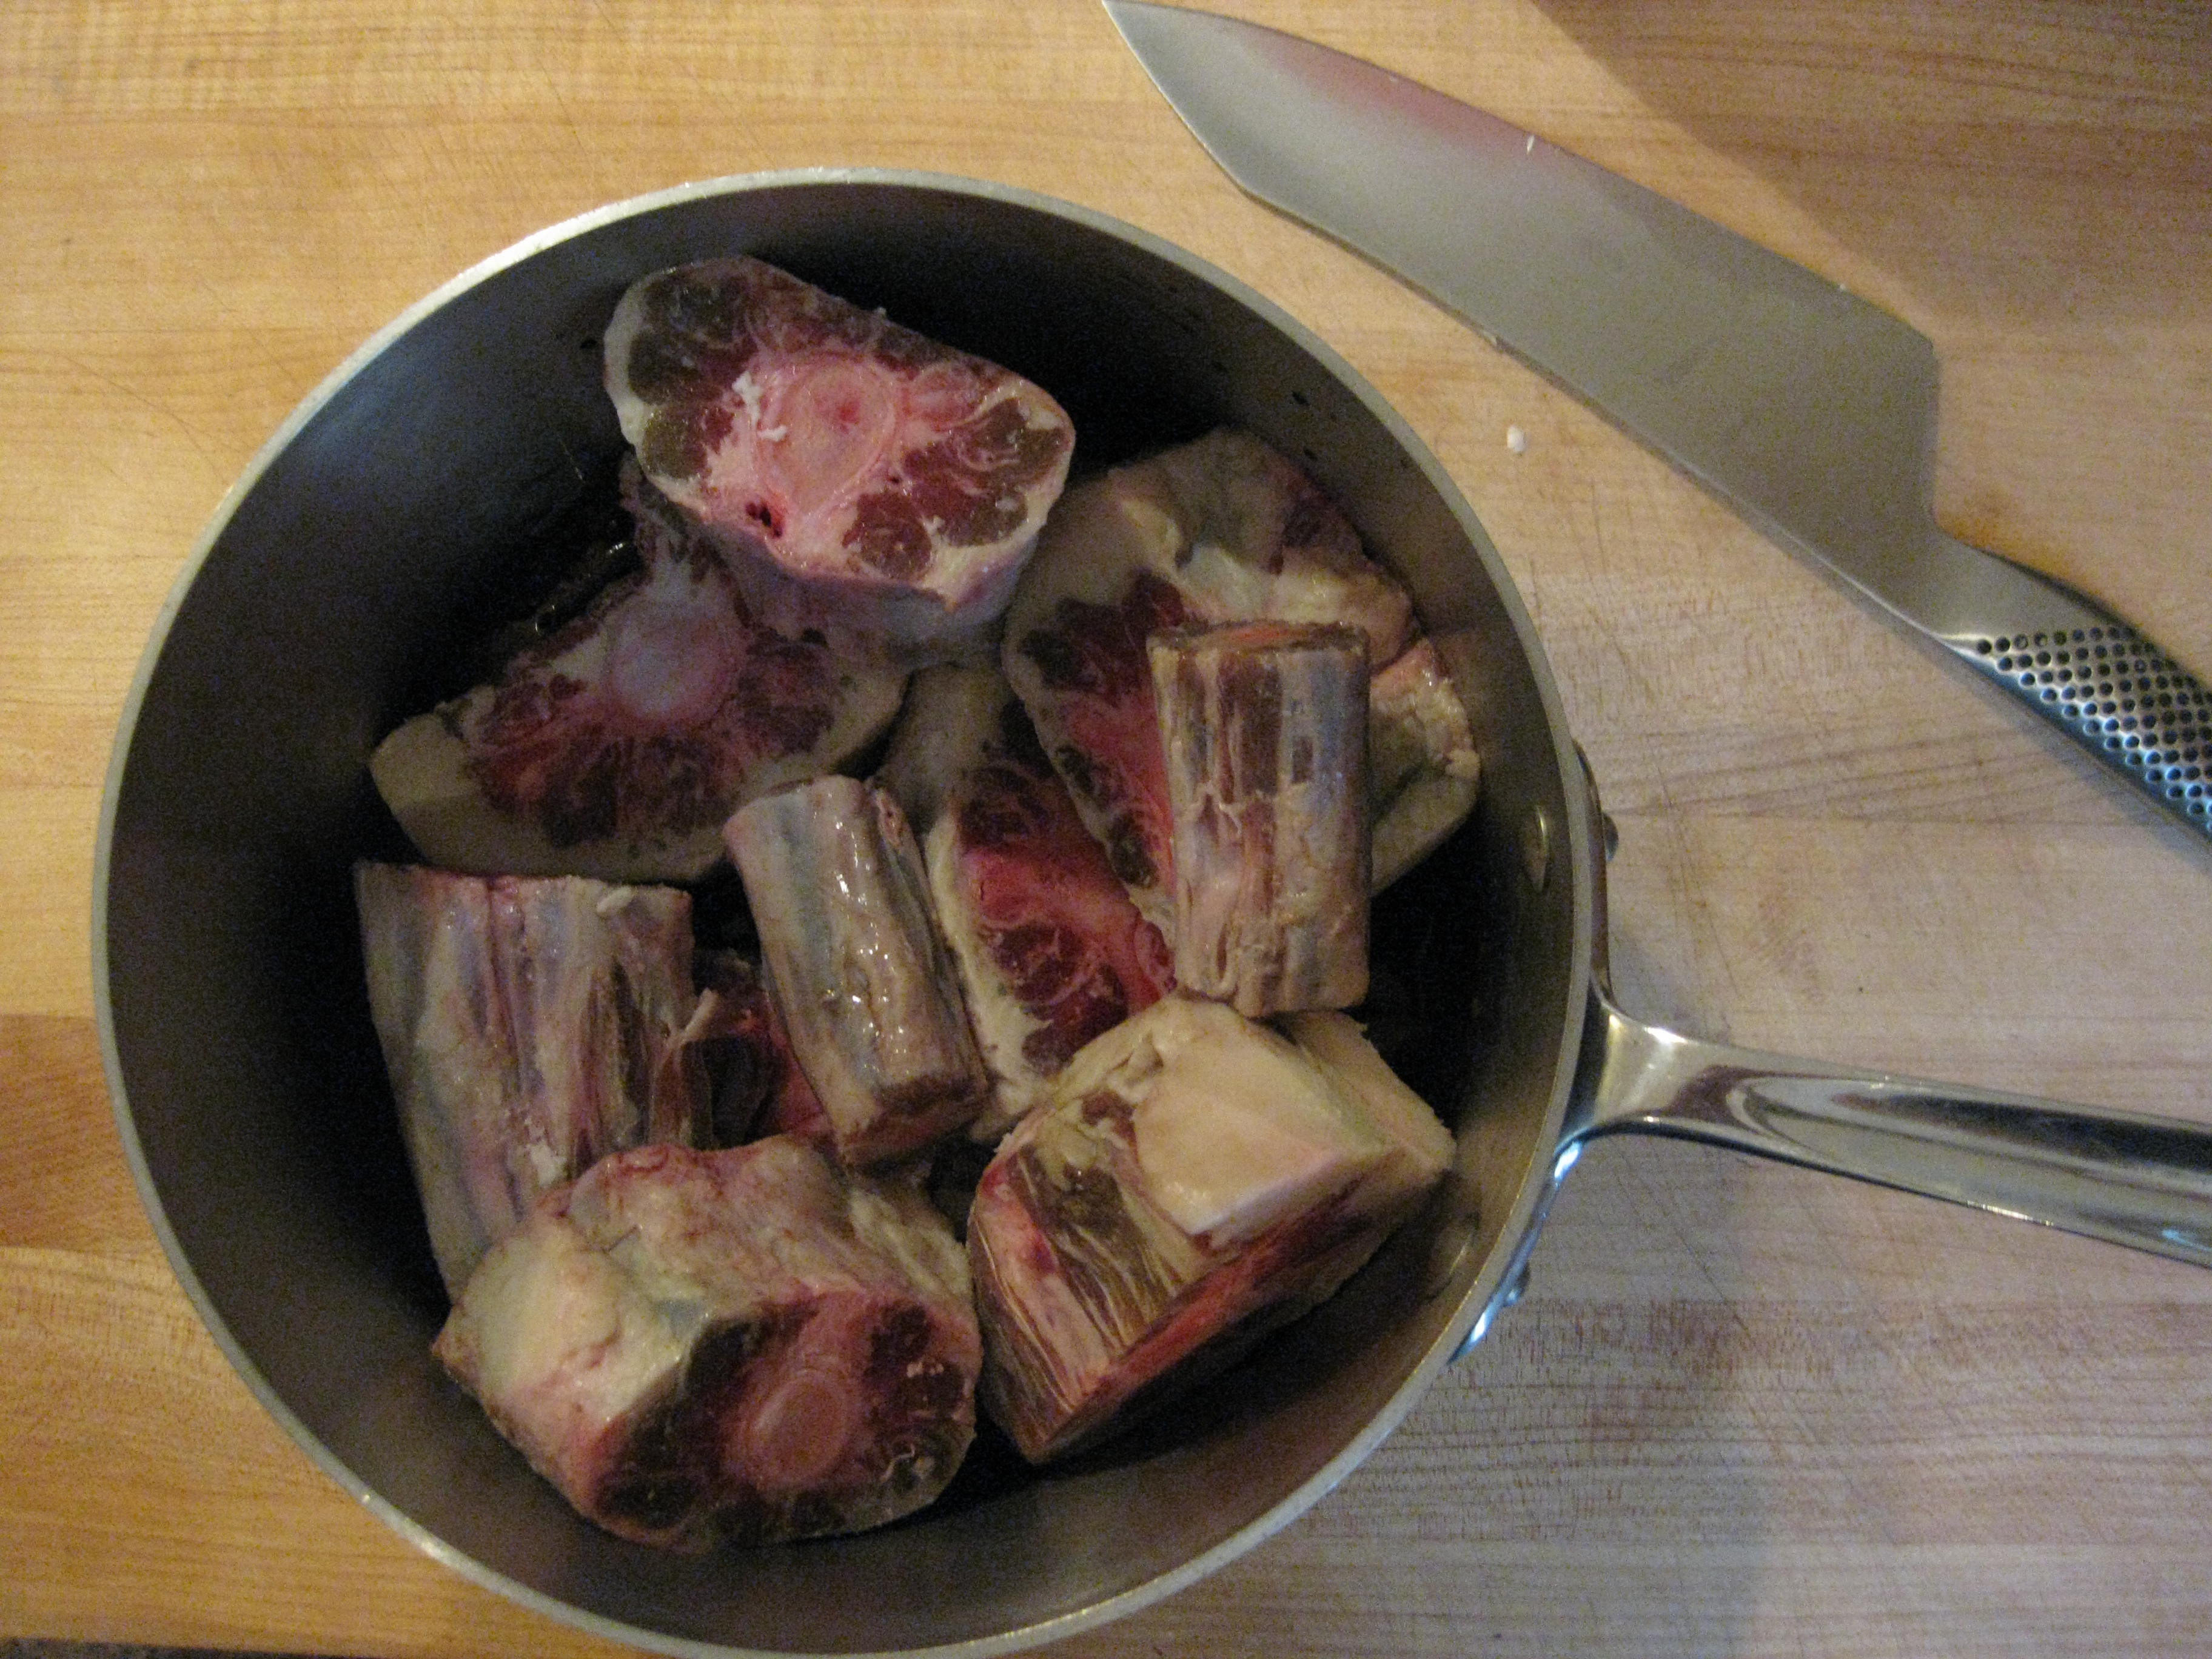 4lbs of Raw Oxtail!